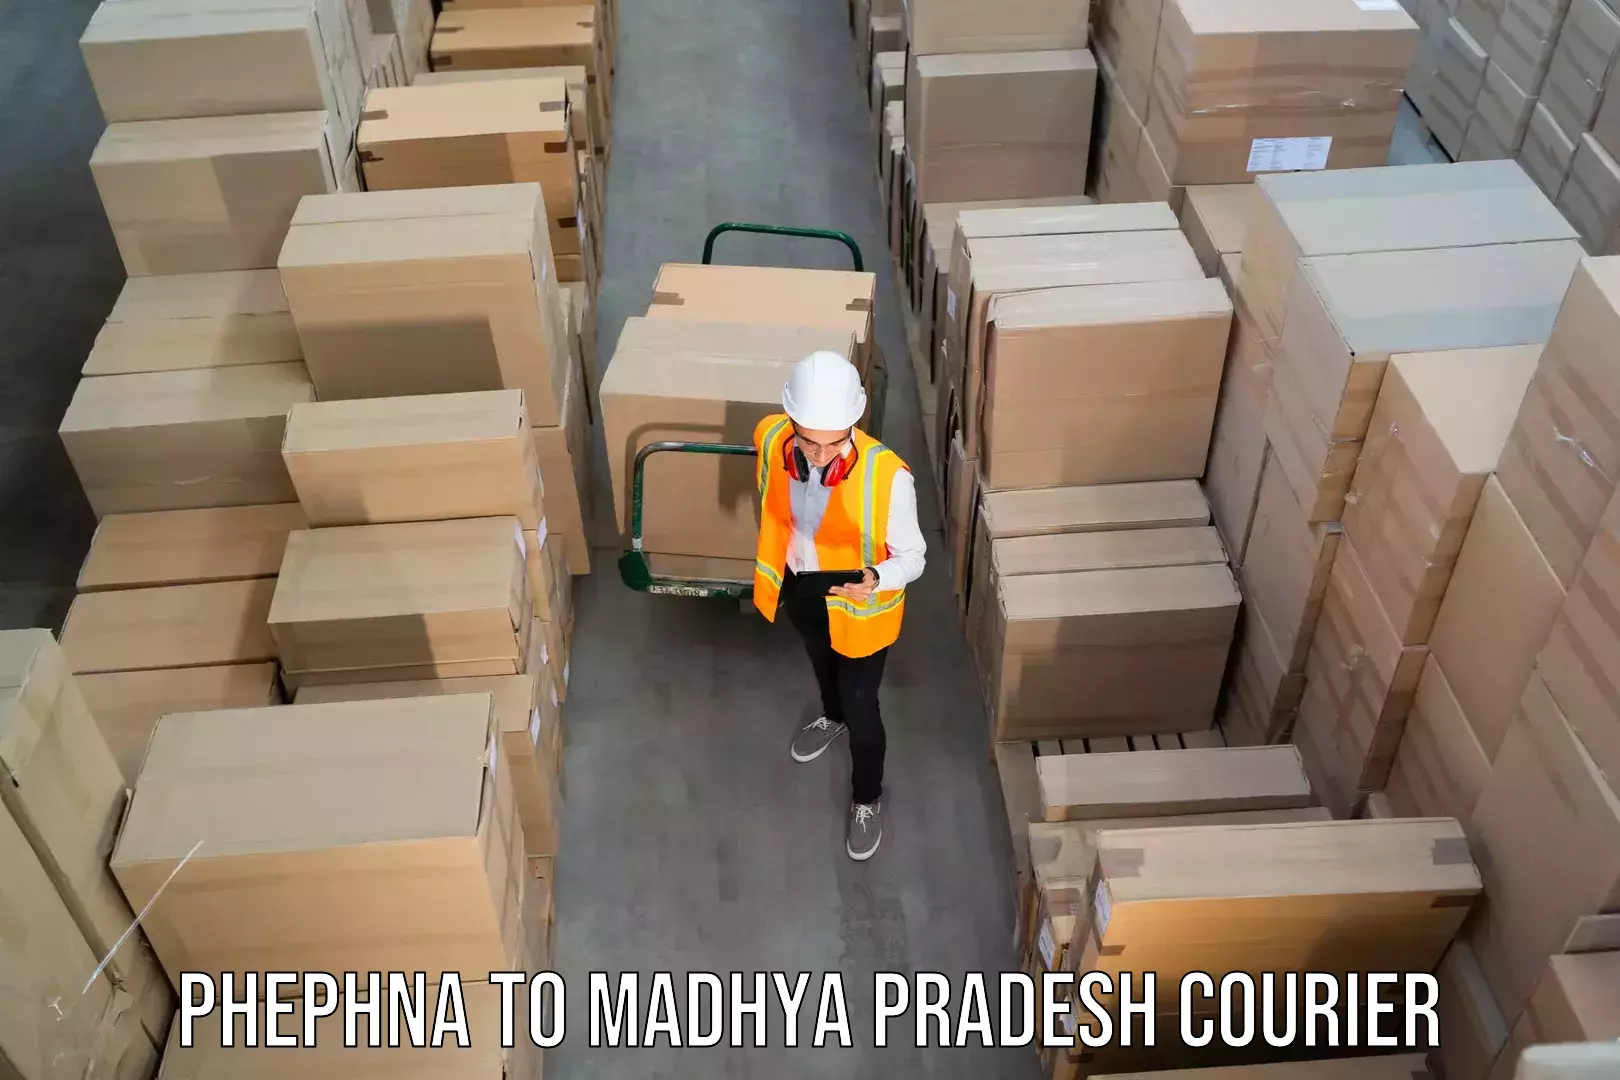 Seamless shipping experience in Phephna to Begumganj